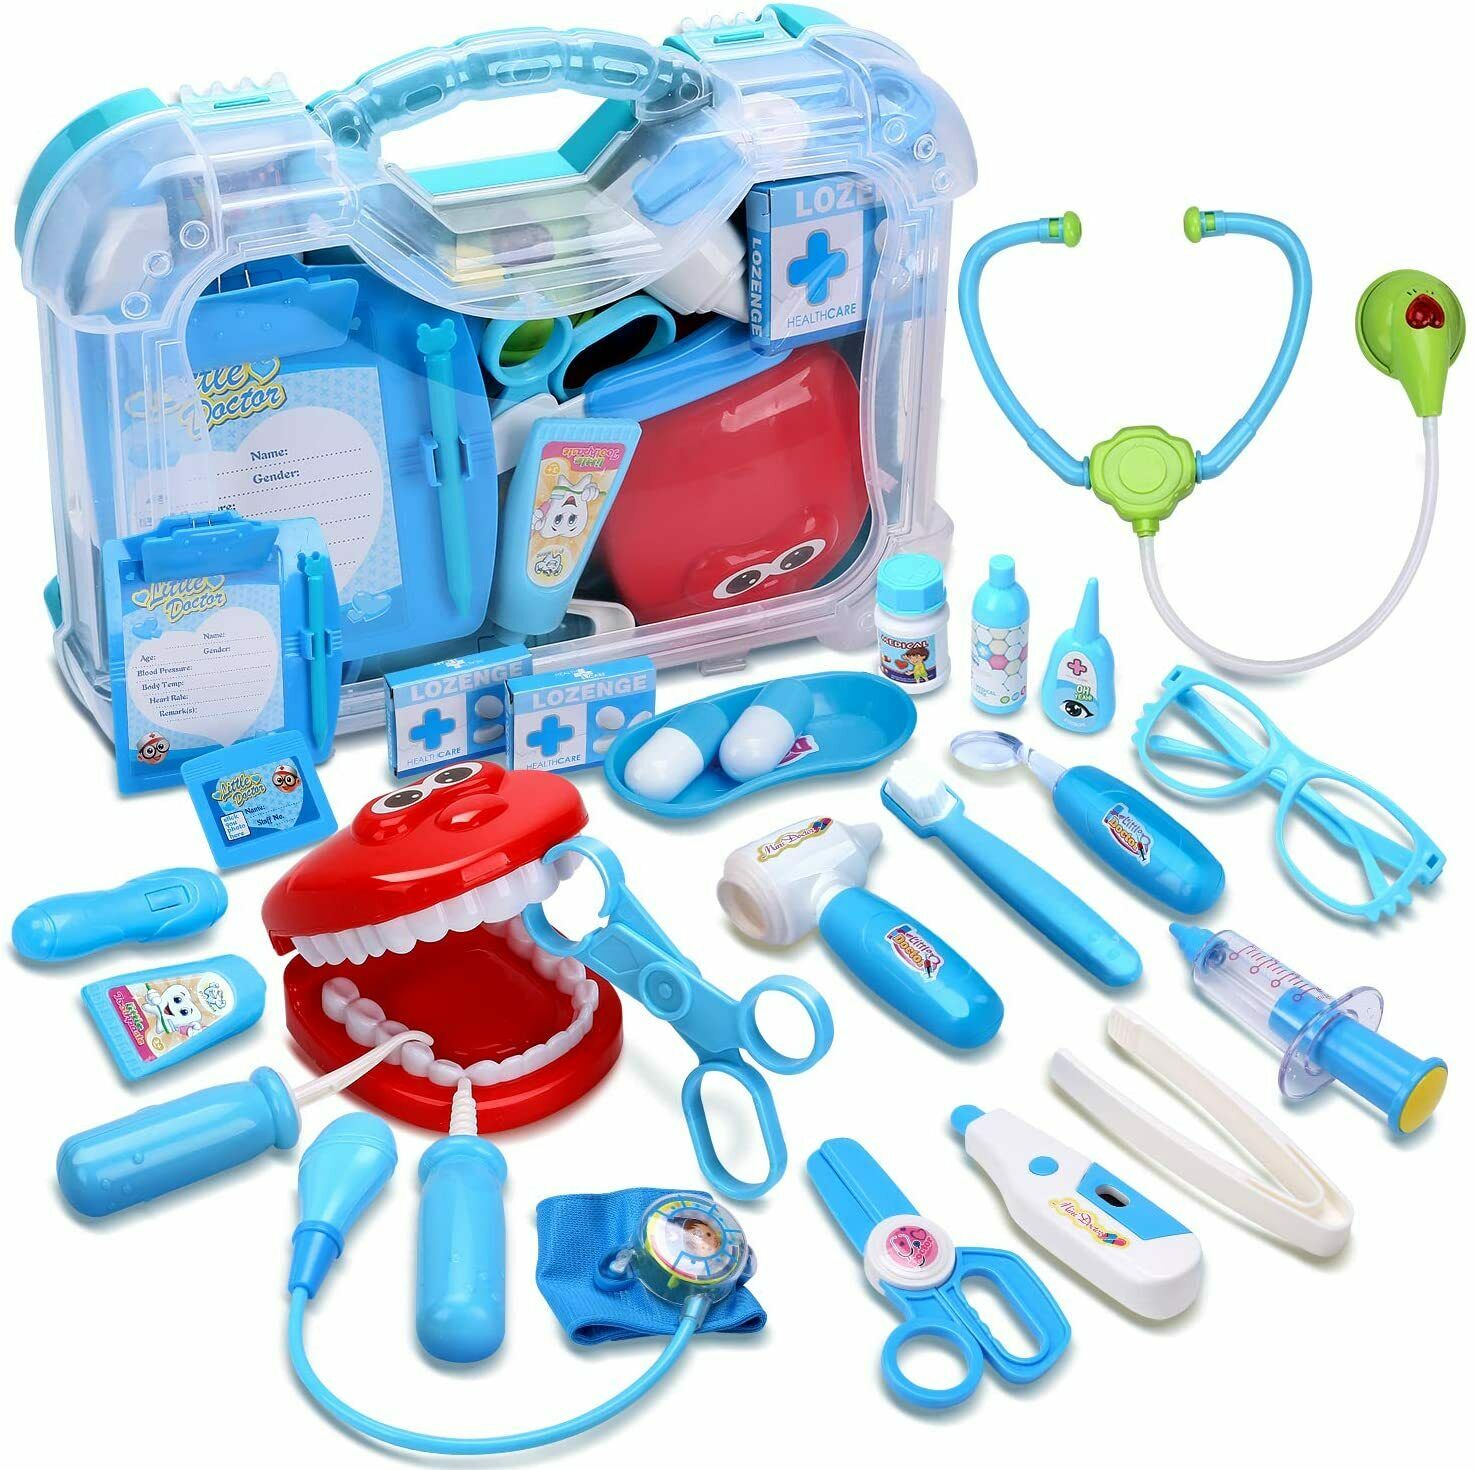 Toy Medical Playset Kit Pretend Play Tools Toy Set 30pcs Dentist Doctor Kit Gift